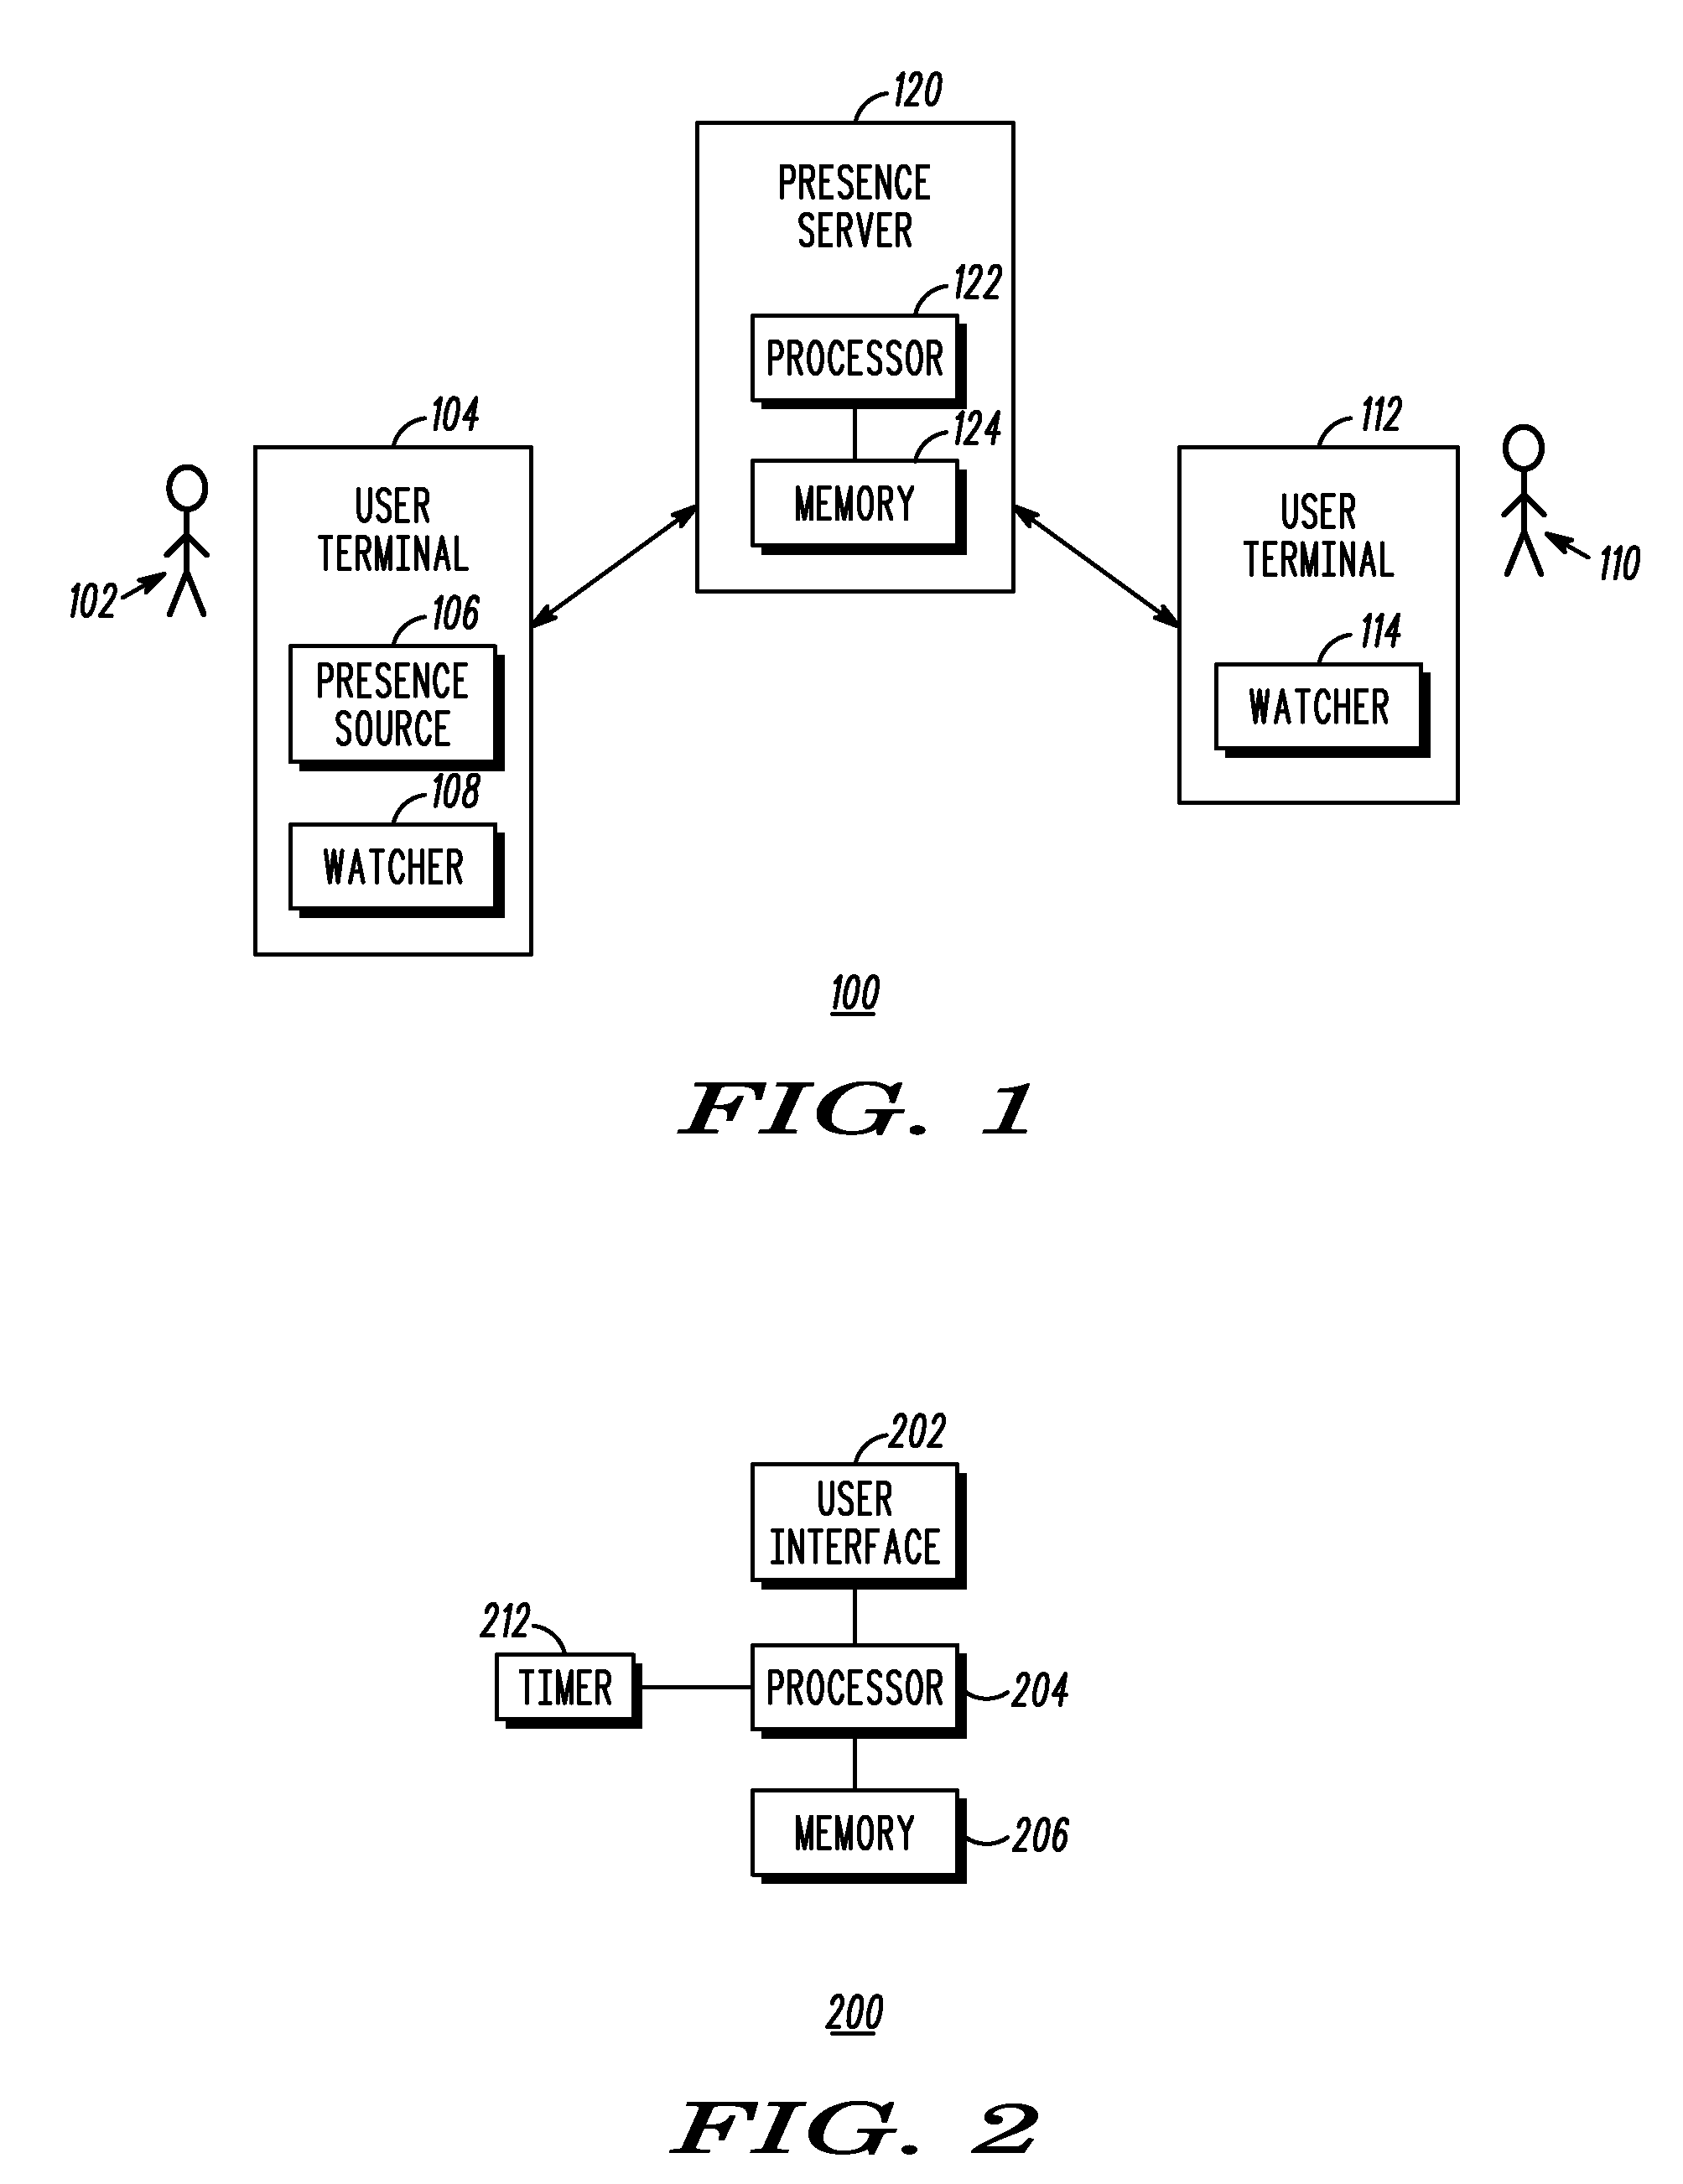 Method and apparatus for updating a presence attribute